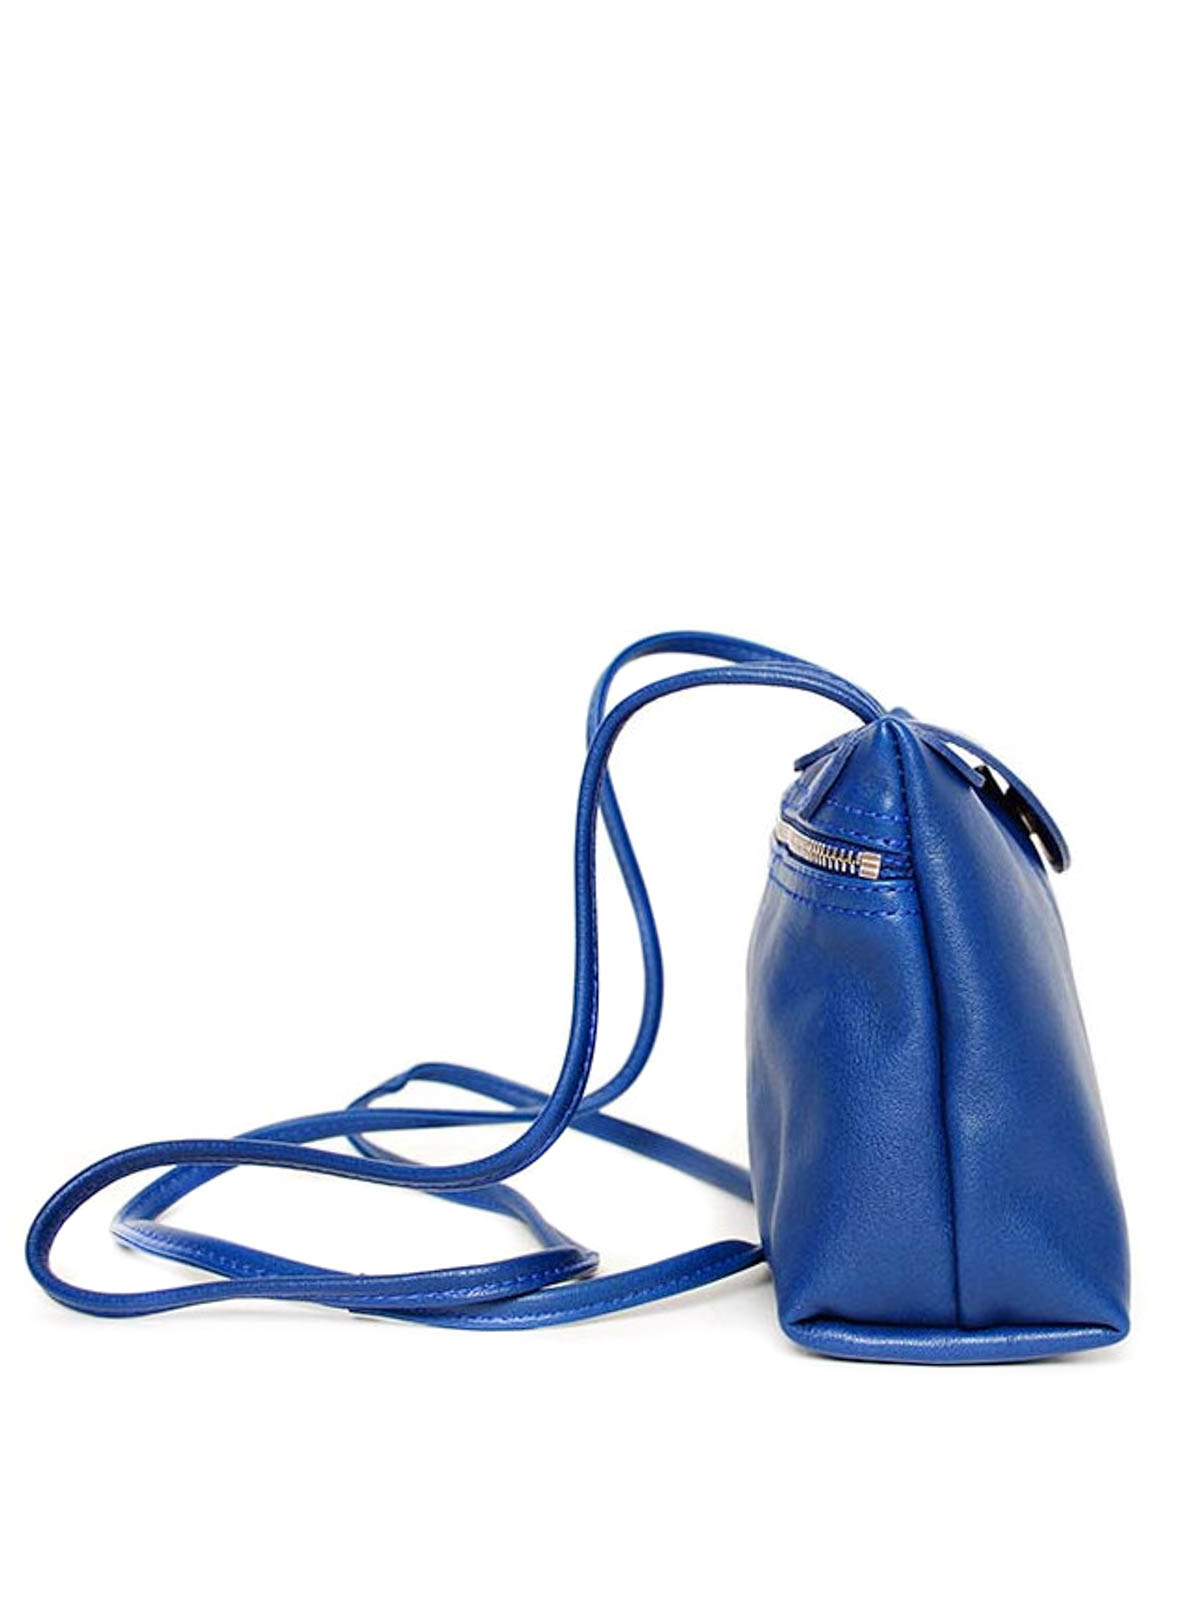 Longchamp Extra-Small Leather Le Pliage Cuir Cross-Body Bag